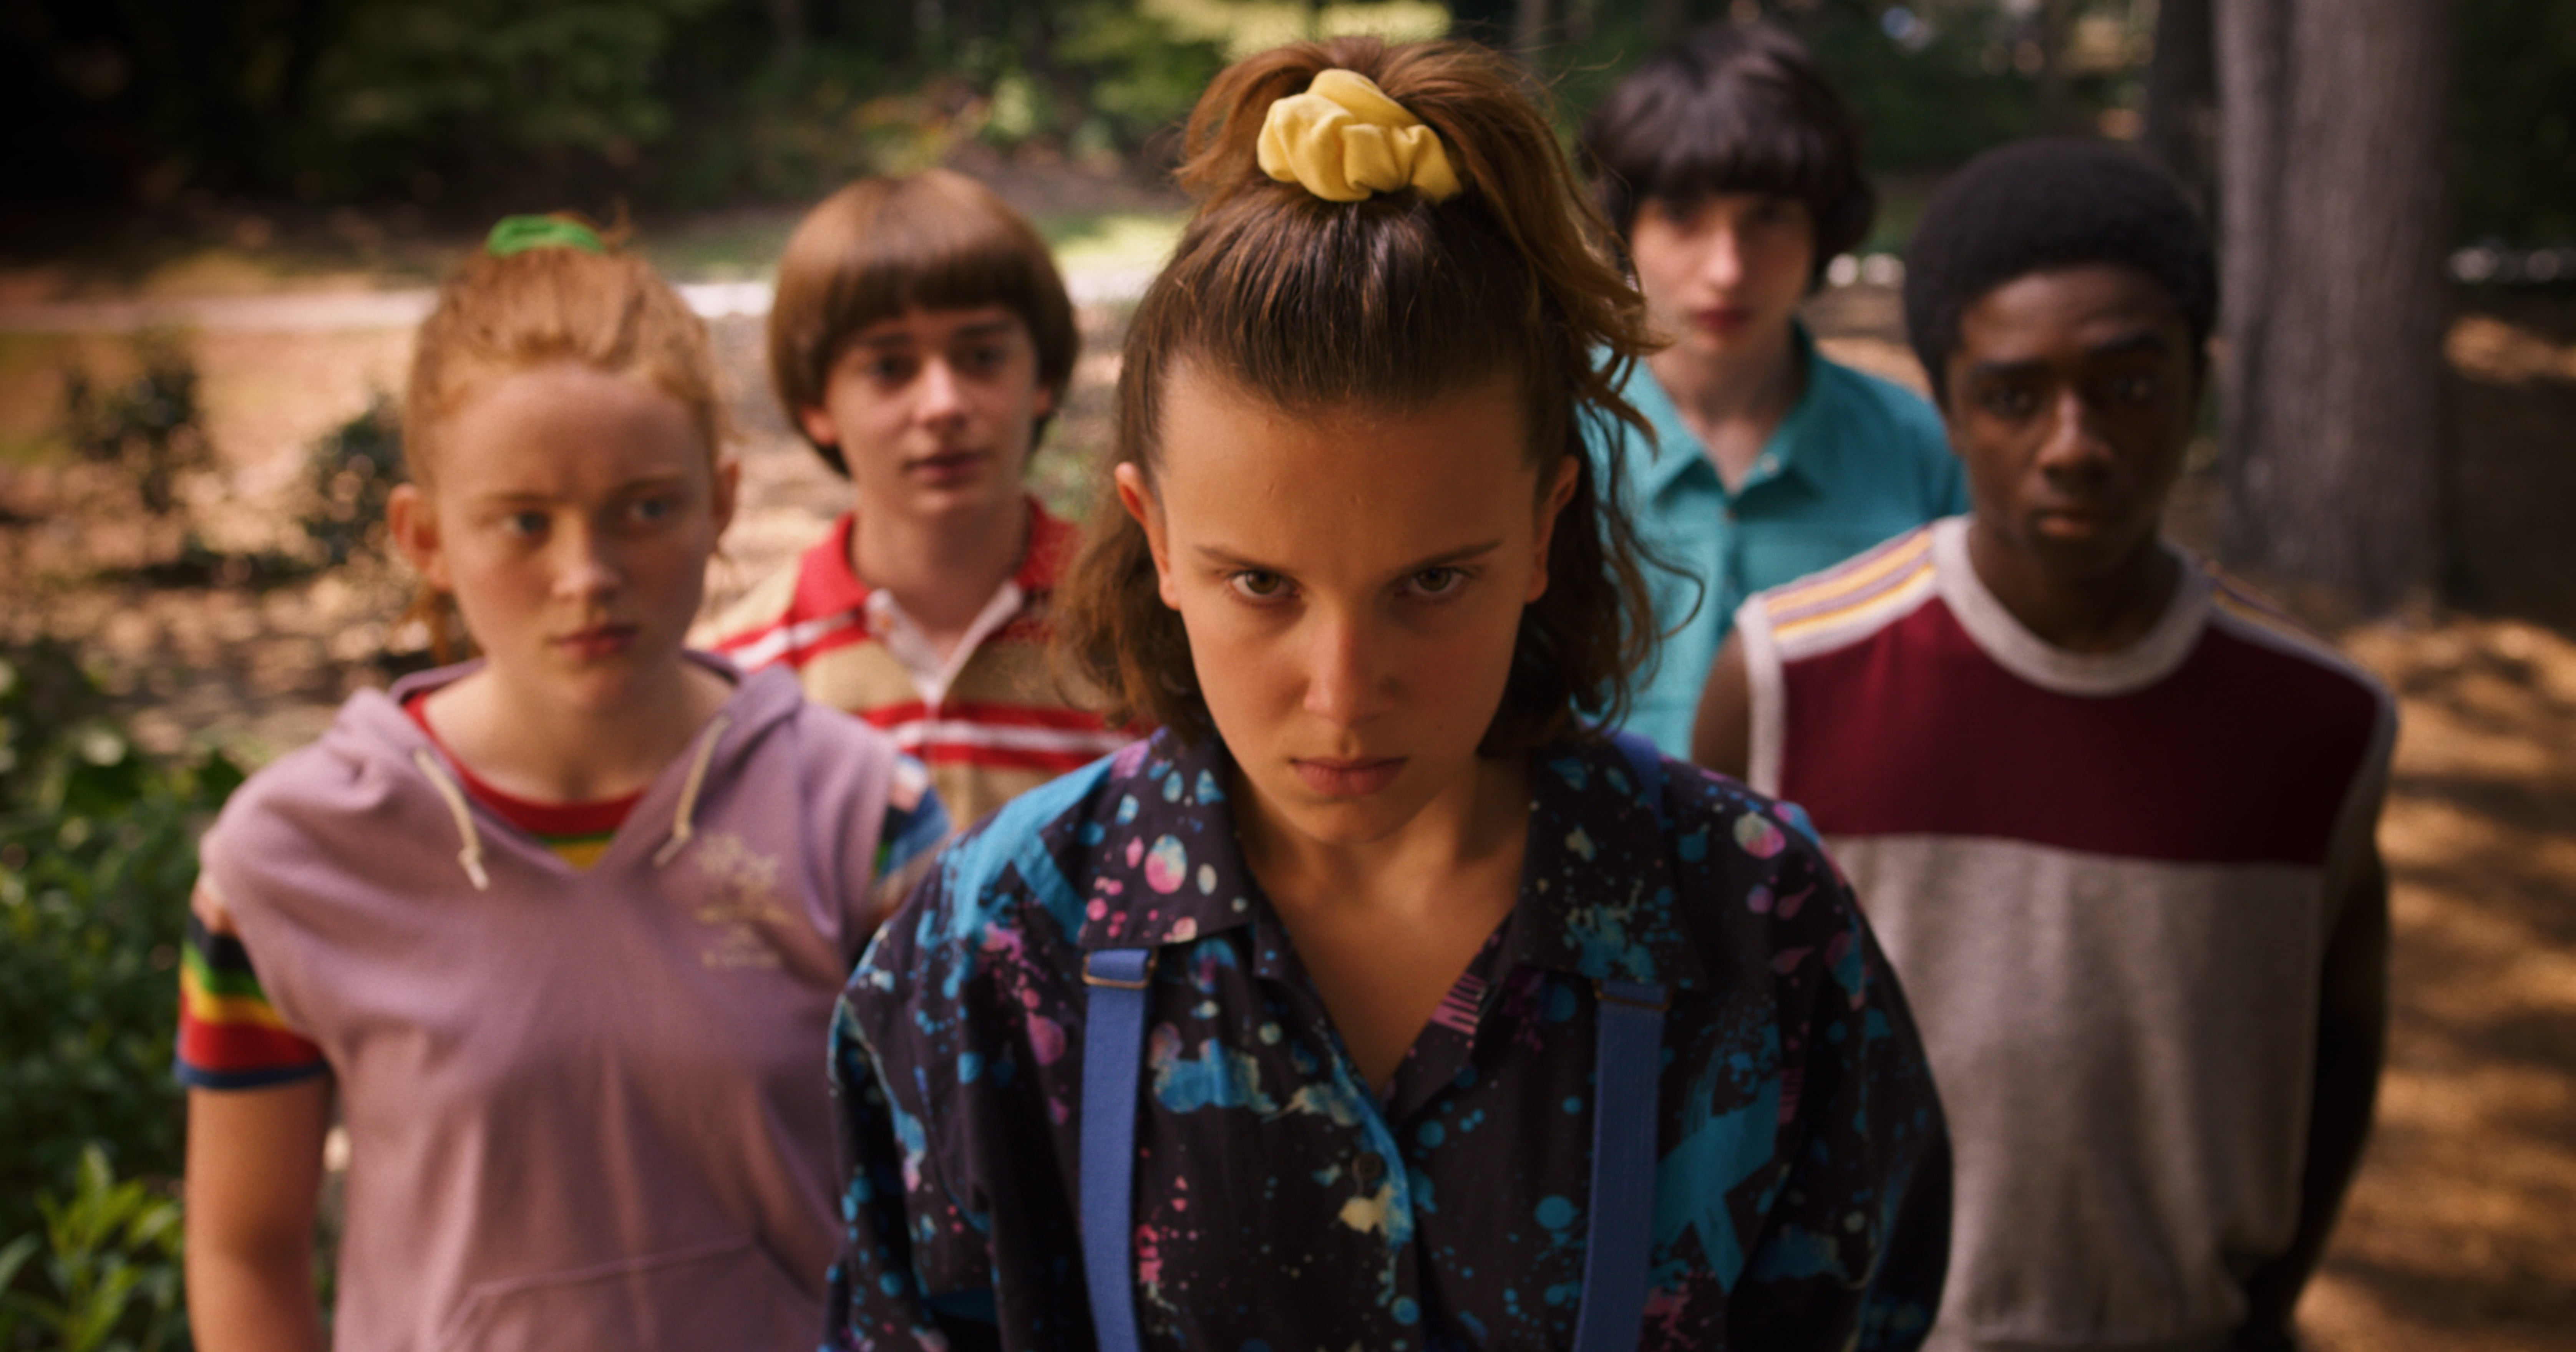 Parents should let kids live like 'Stranger Things' characters